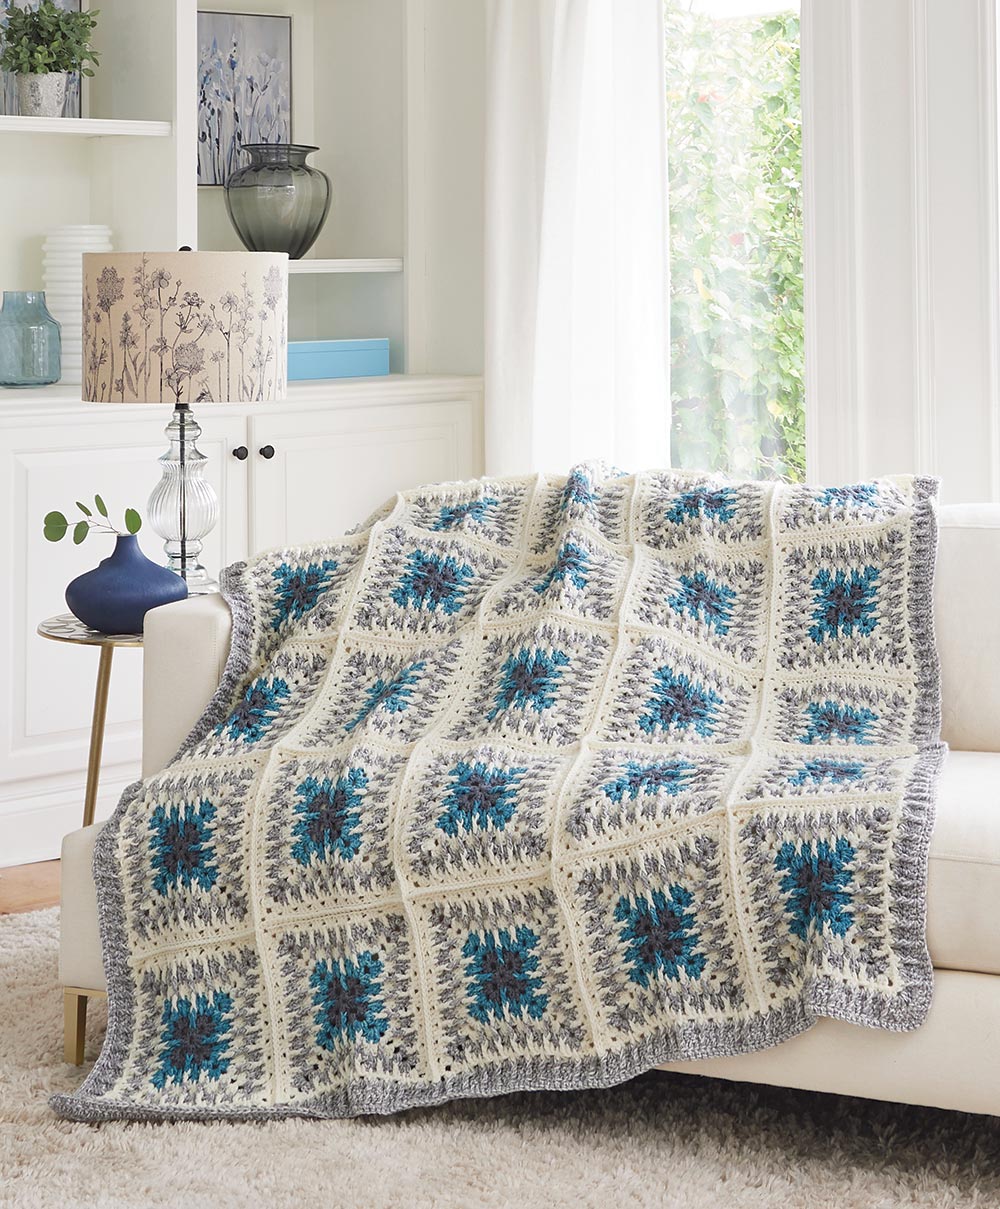 Spiked Granny Blanket